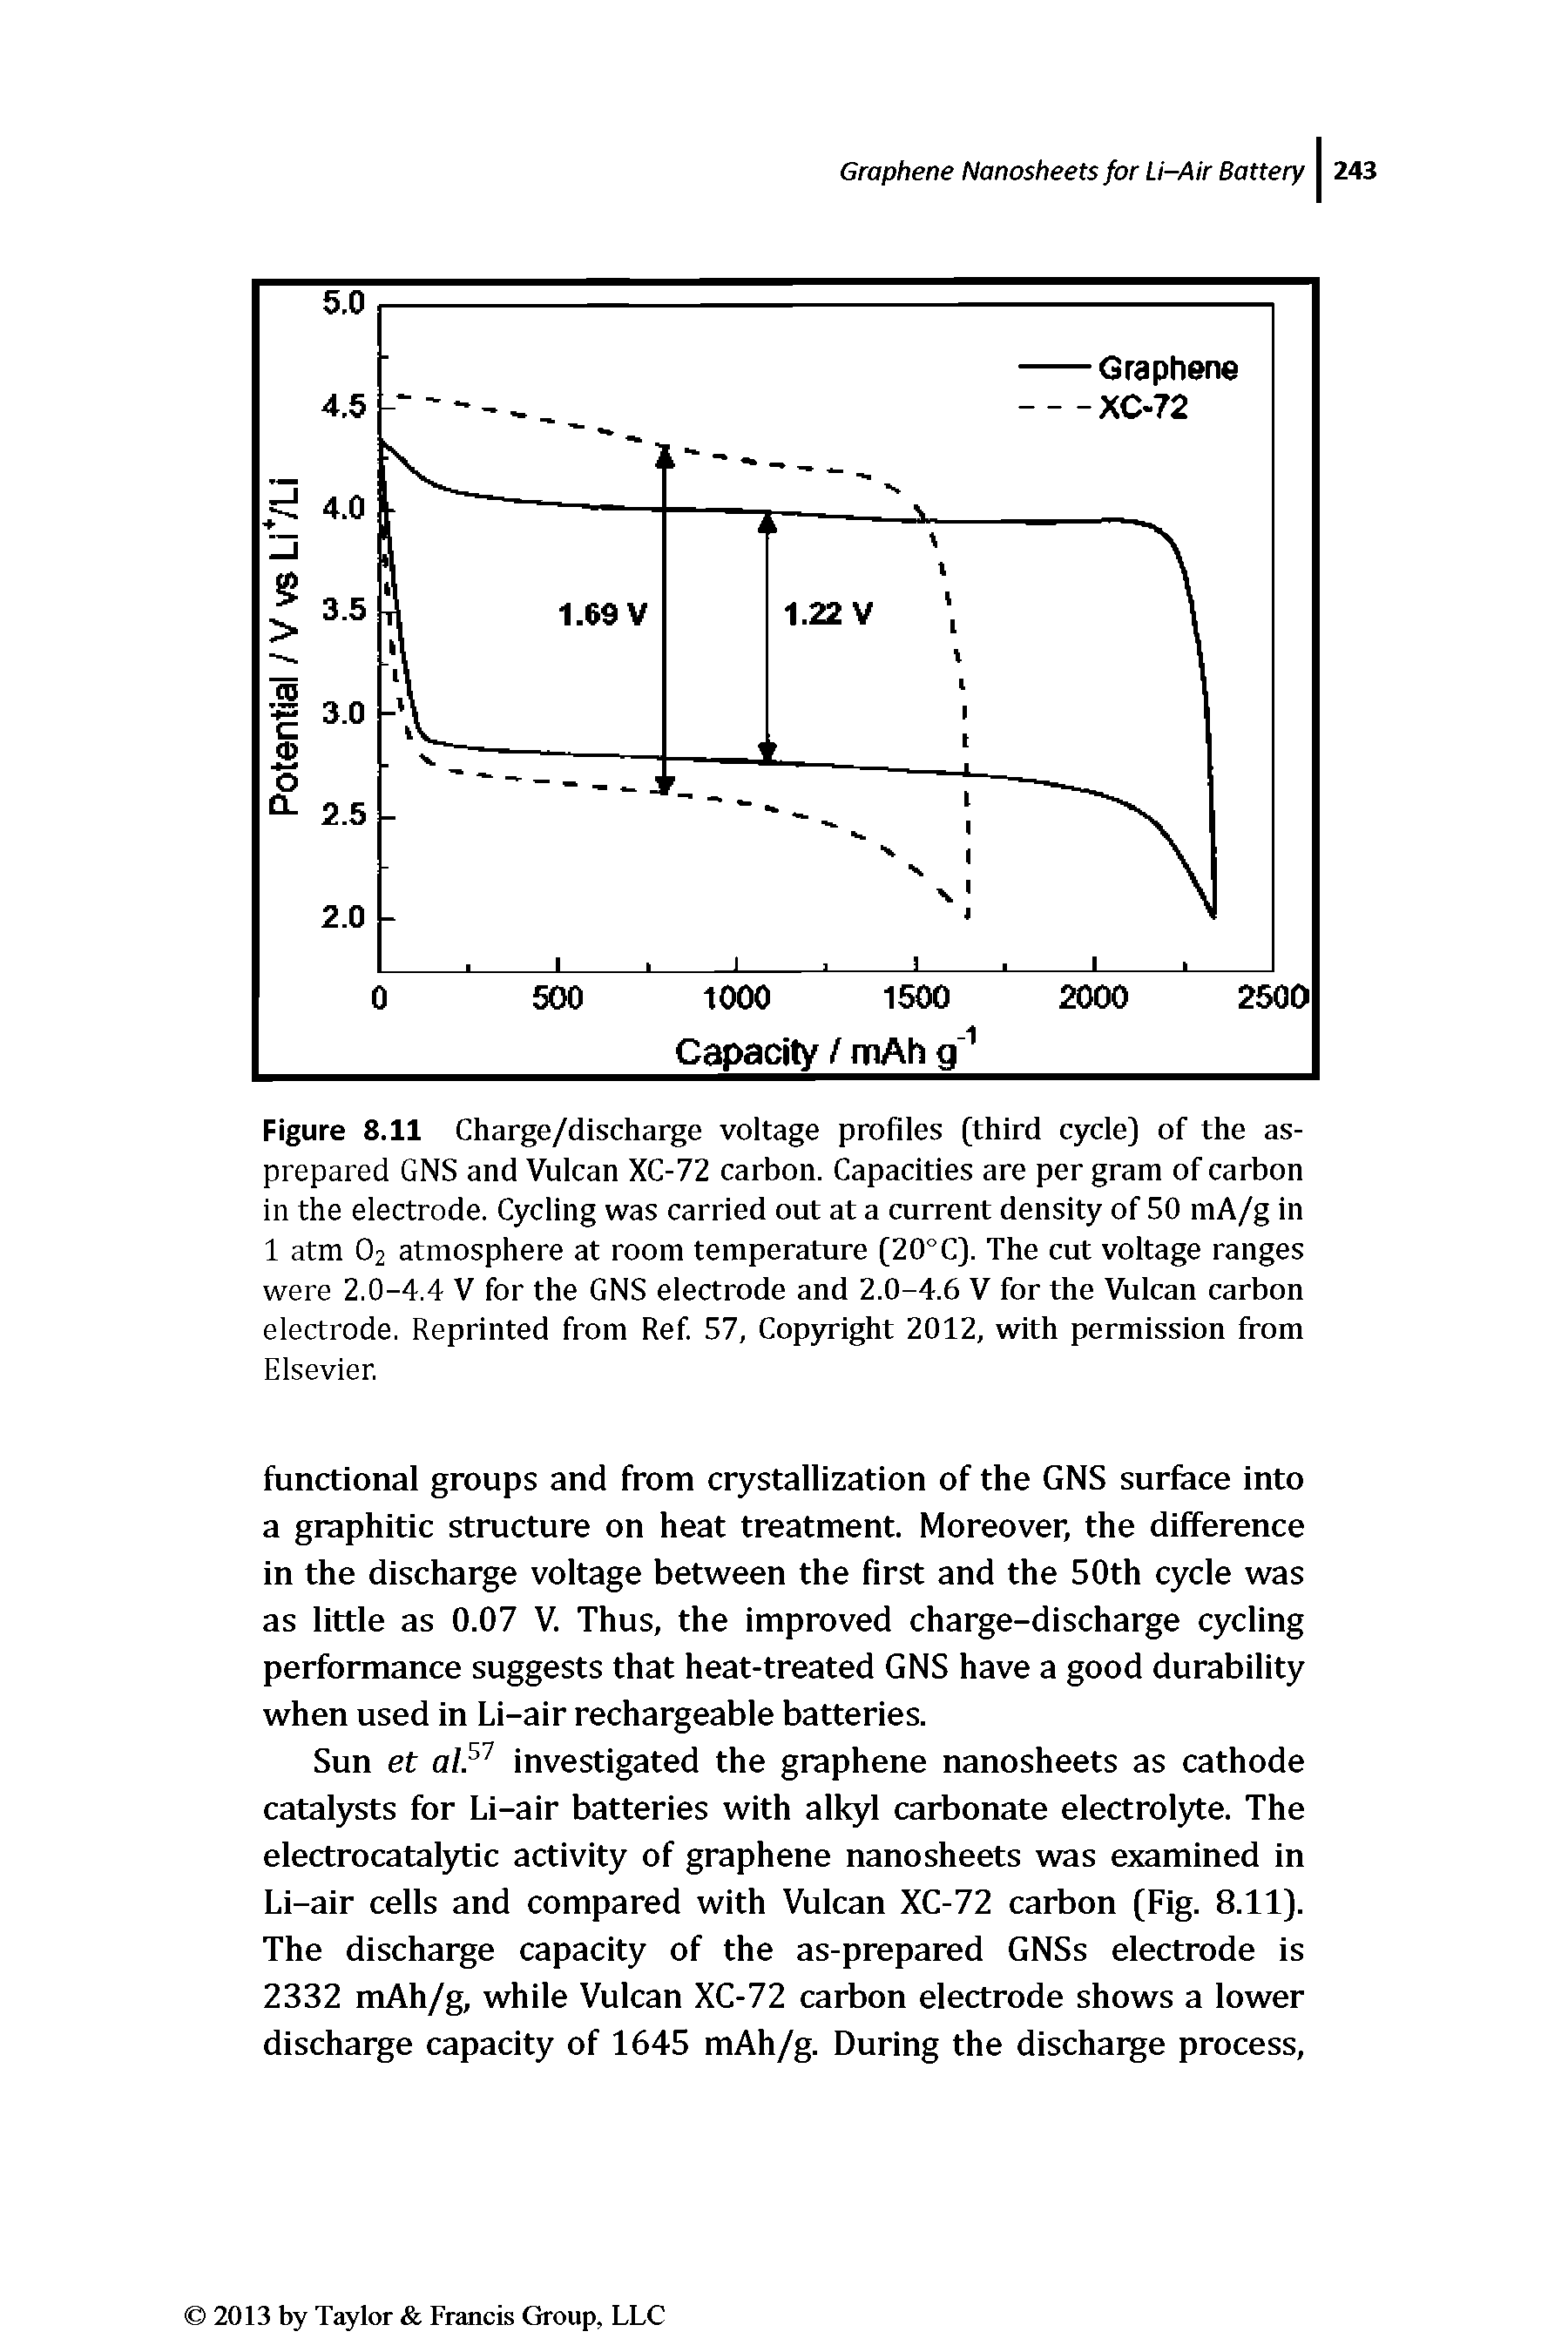 Figure 8.H Charge/dischai e voltage profiles (third cycle) of the as-prepared GNS and Vulcan XC-72 carbon. Capacities are per gram of carbon in the electrode. Cycling was carried out at a current density of 50 mA/g in 1 atm O2 atmosphere at room temperature (20°C). The cut voltage ranges were 2.0-4.4 V for the GNS electrode and 2.0-4.6 V for the Vulcan carbon electrode. Reprinted from Ref. 57, Copyright 2012, with permission from Elsevier.